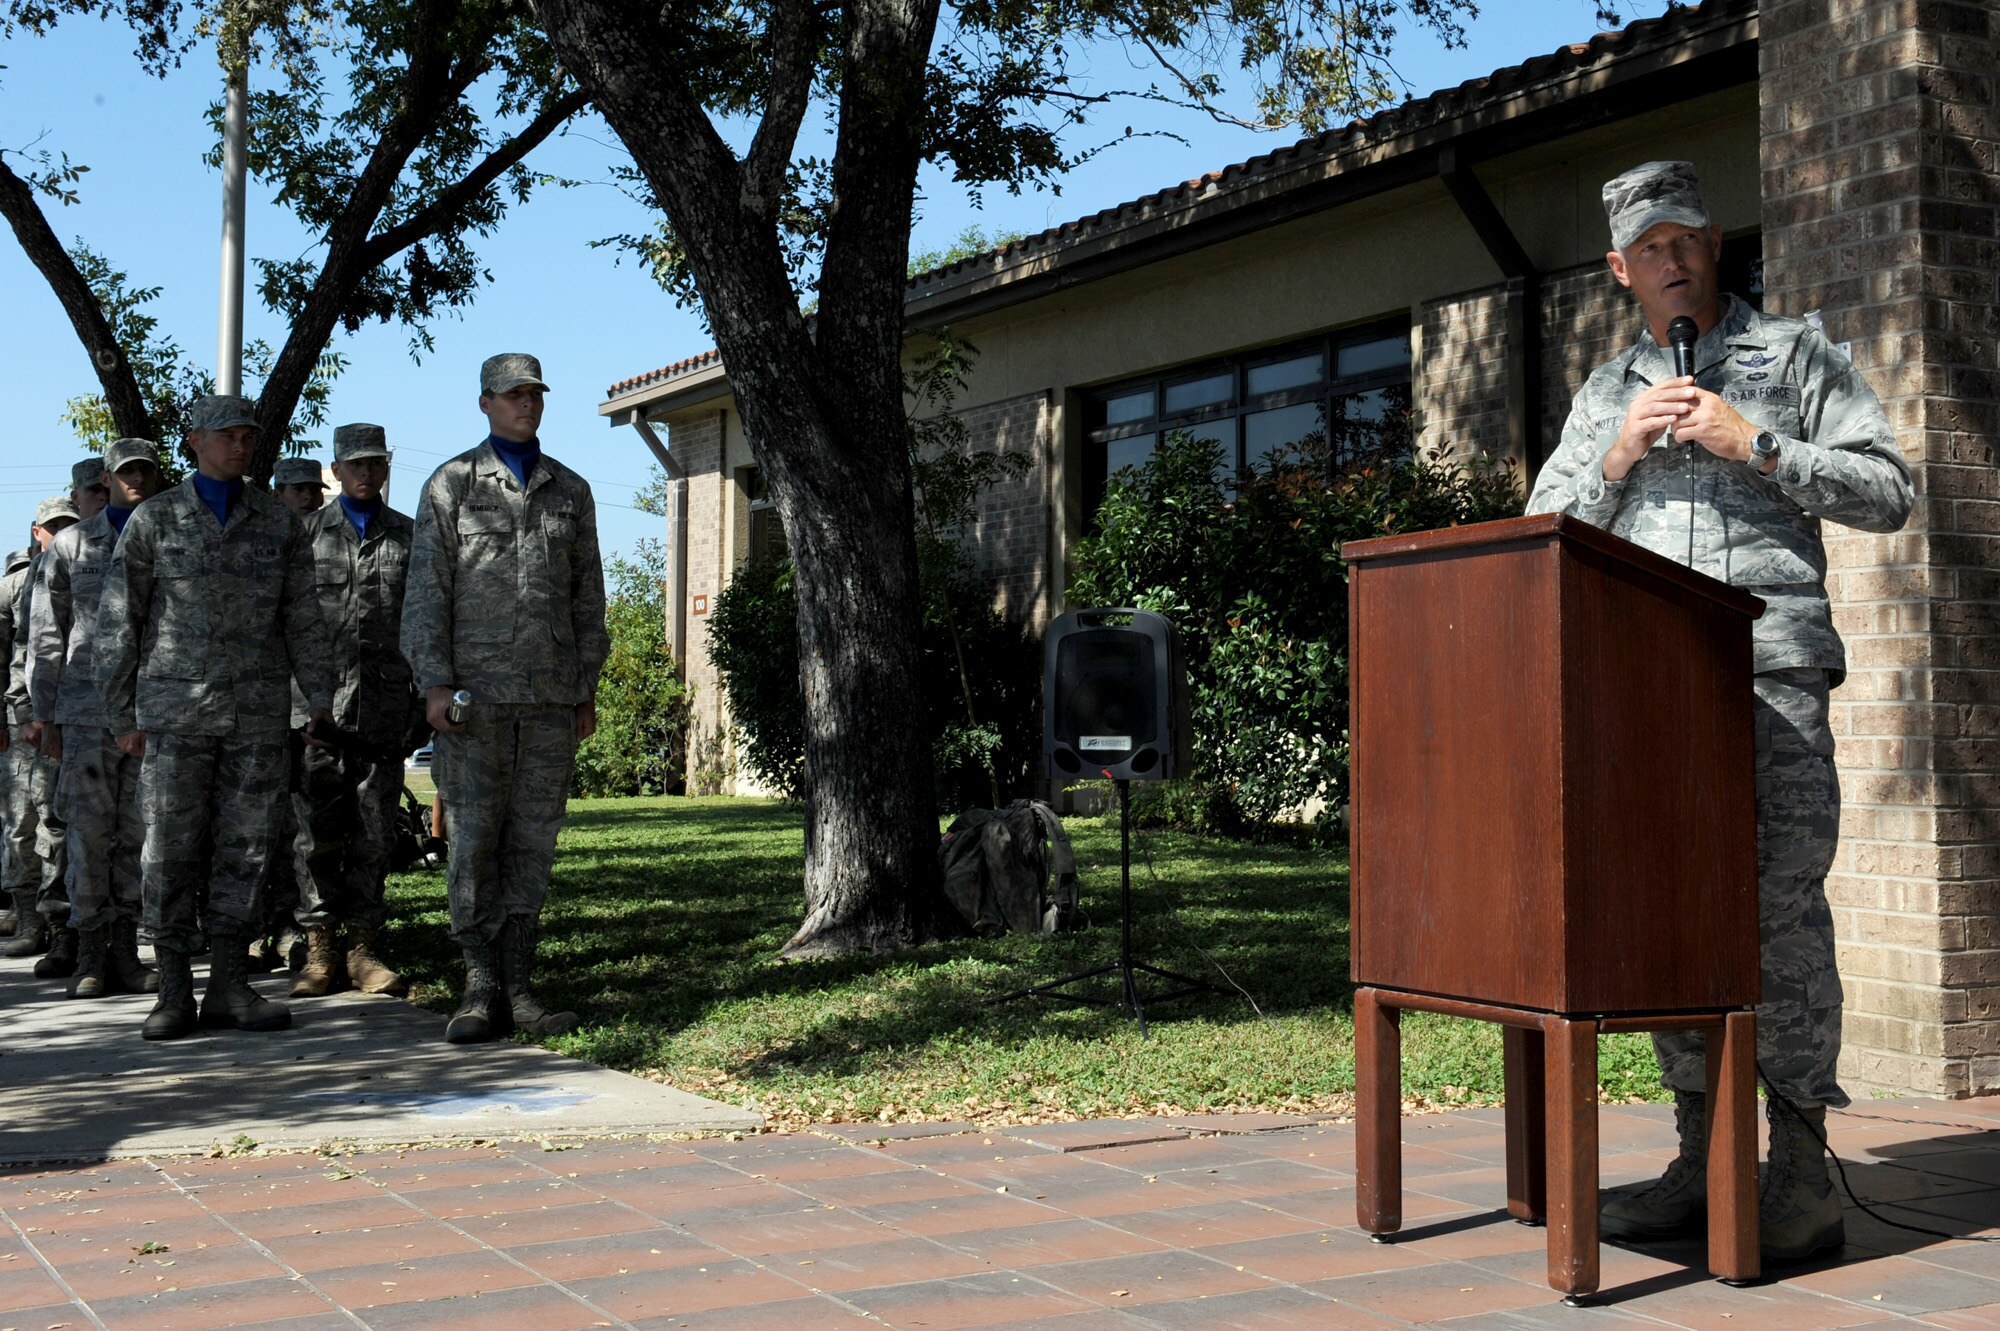 Col. William H. Mott V speaks during a ceremony Oct. 9, 2010, to mark the start of the Tim Davis Special Tactics Memorial March conducted by a 15-man team who will walk from Lackland Air Force Base, Texas, to Hurlburt Field, Fla., to honor fallen special tactics Airmen.  Colonel Mott is the 37th Training Wing commander at Lackland AFB.  The journey will cover more than 800 miles and five states. (U.S. Air Force photo/Staff Sgt. Desiree N. Palacios)